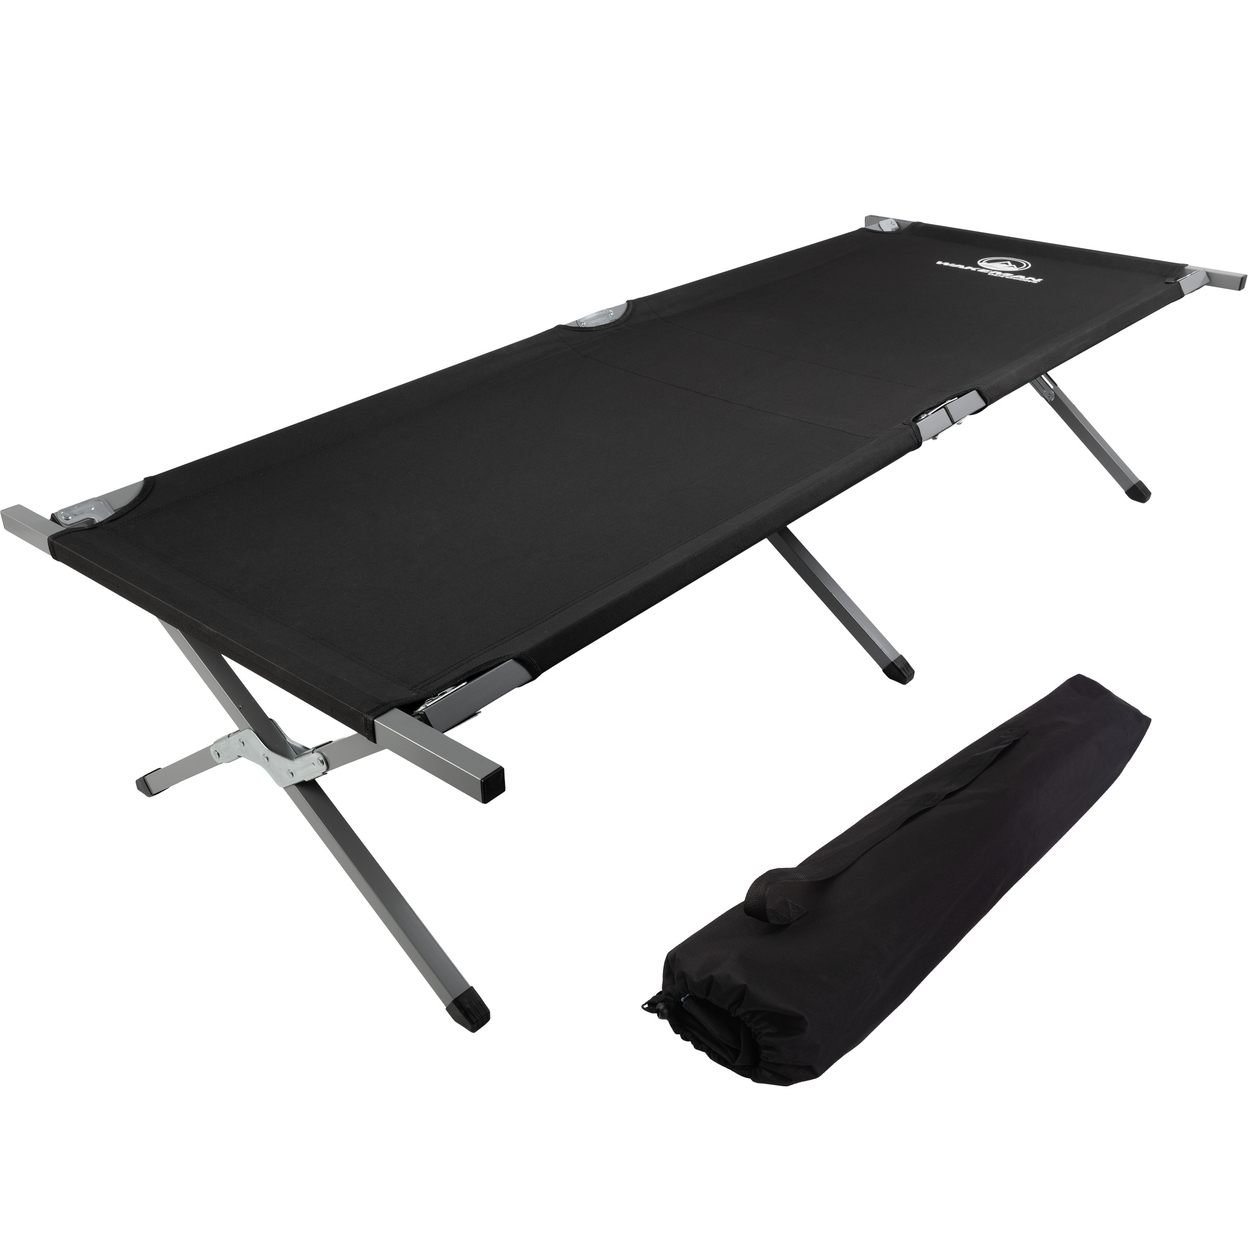 Outdoors Camping Cot Portable Folding Bed With Carry Bag, Black